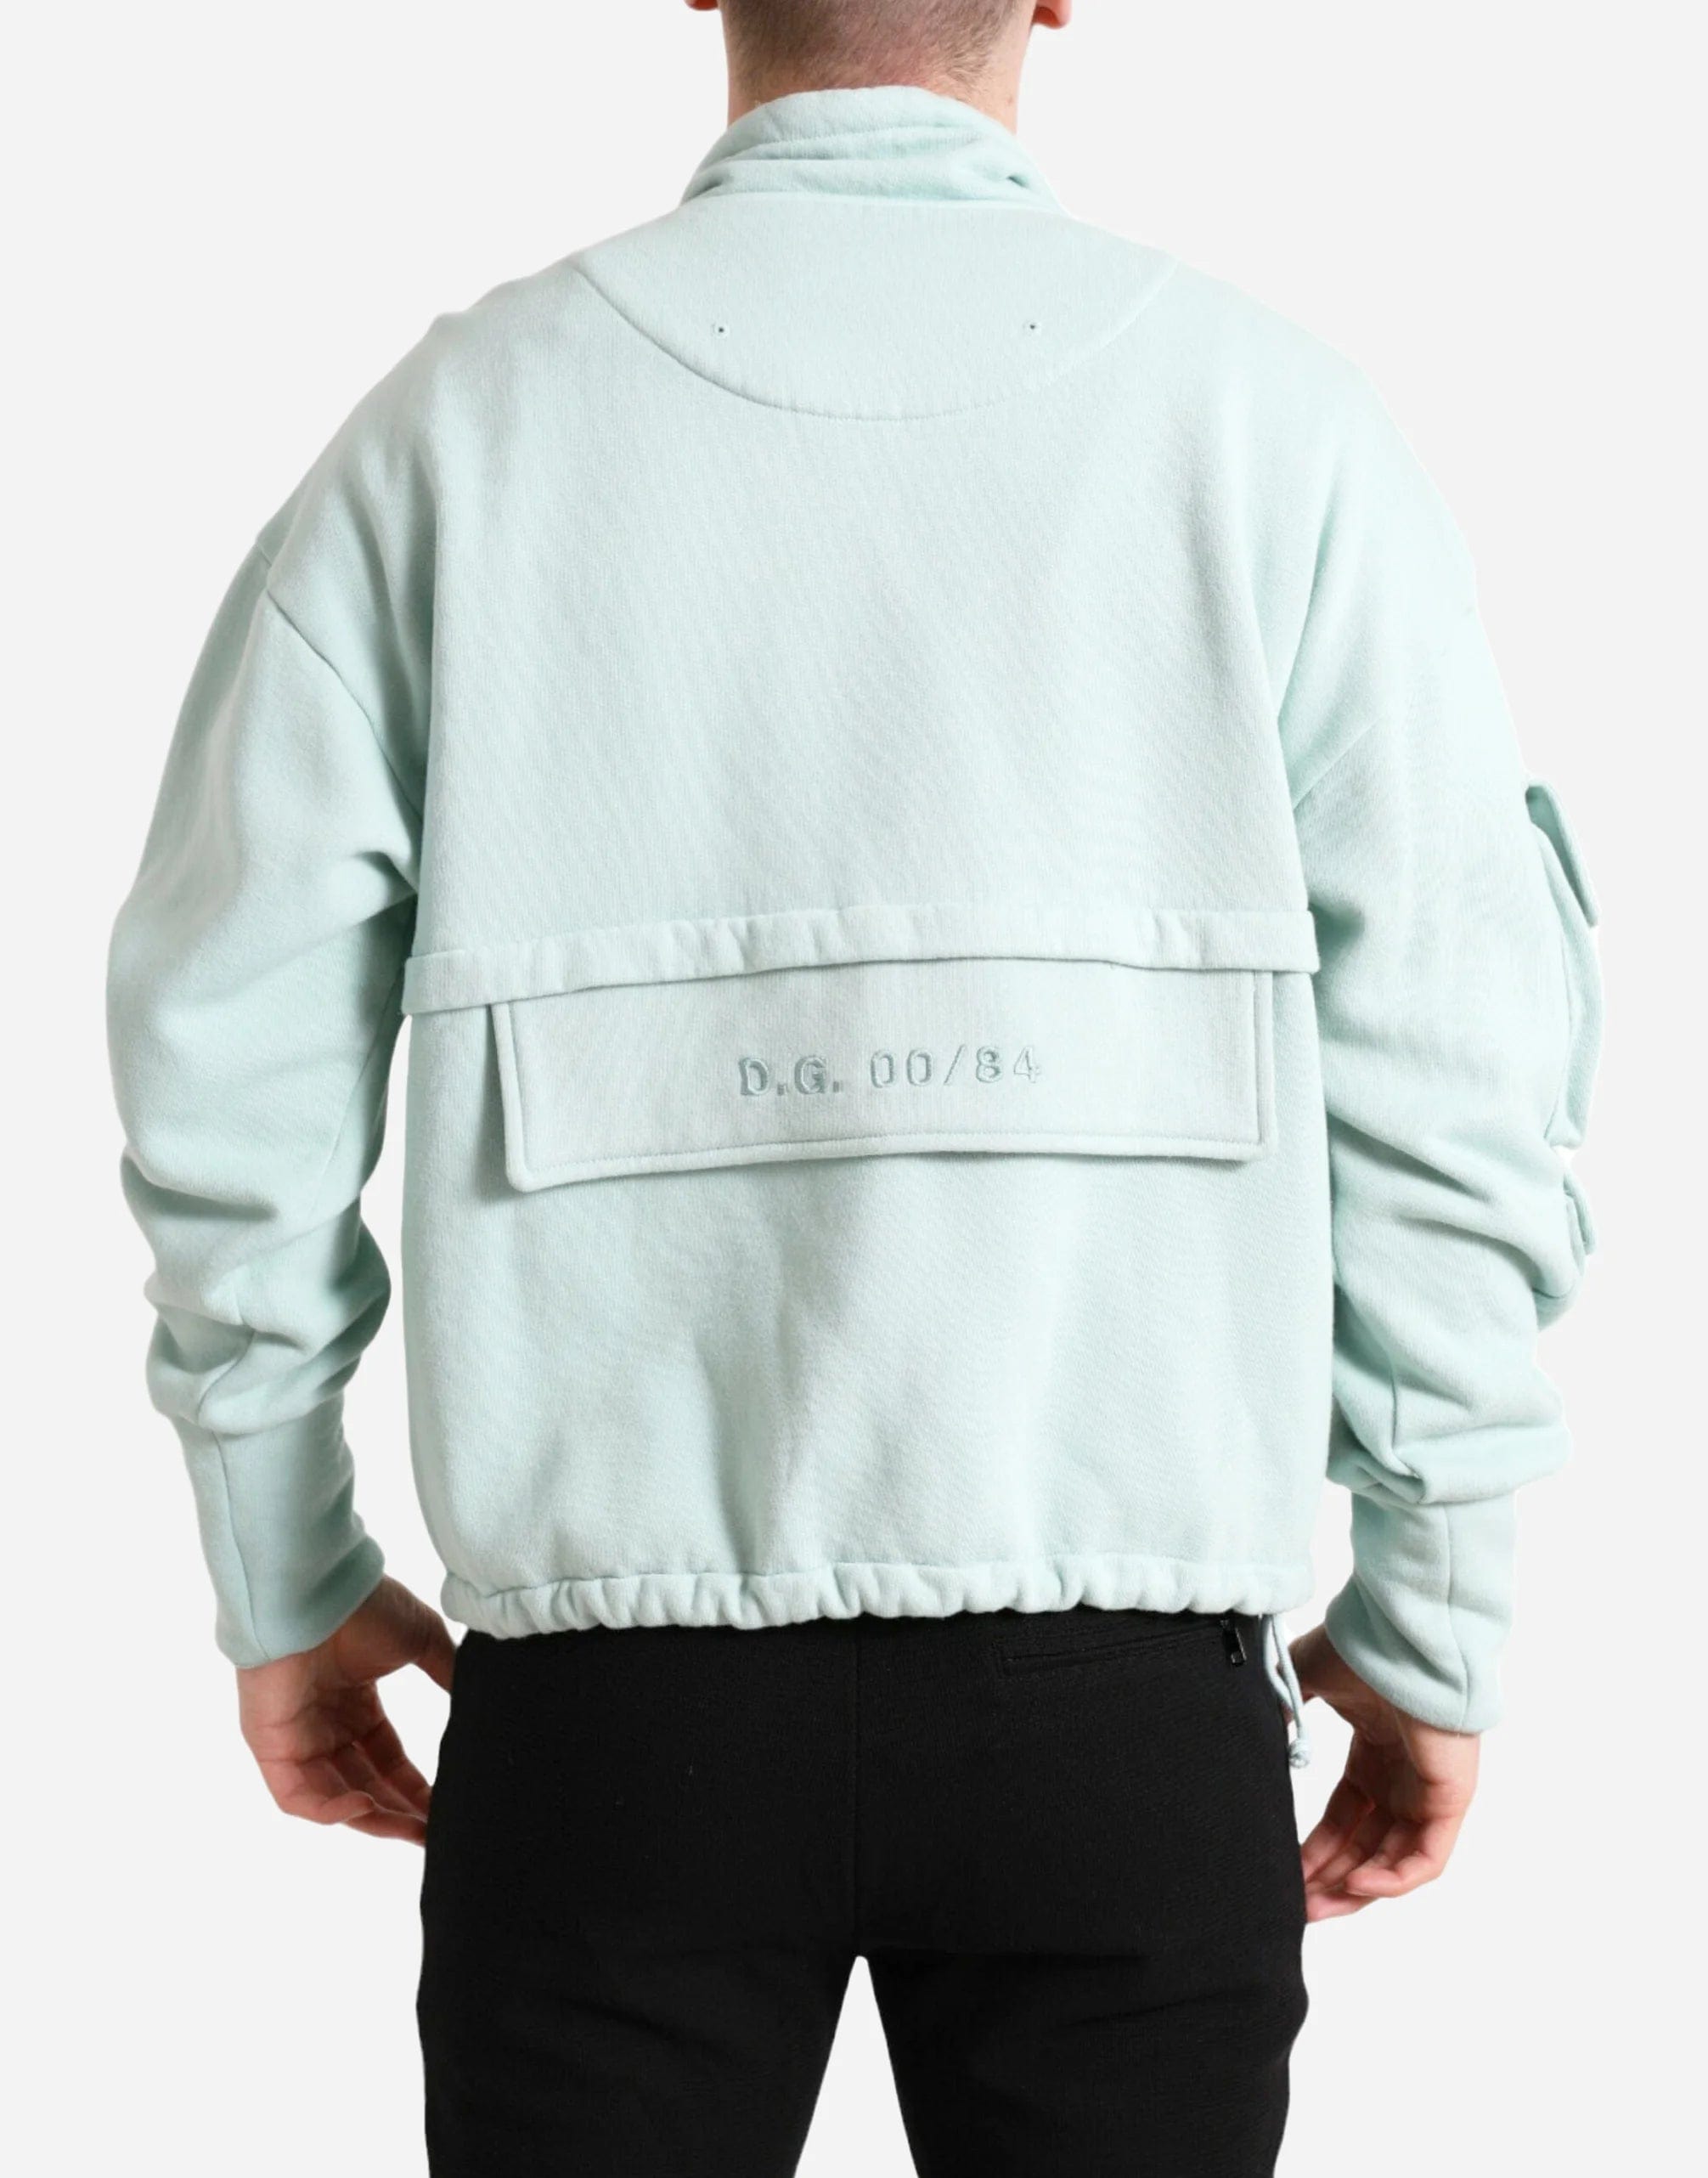 Dolce & Gabbana Patch Pocket Pullover Sweater